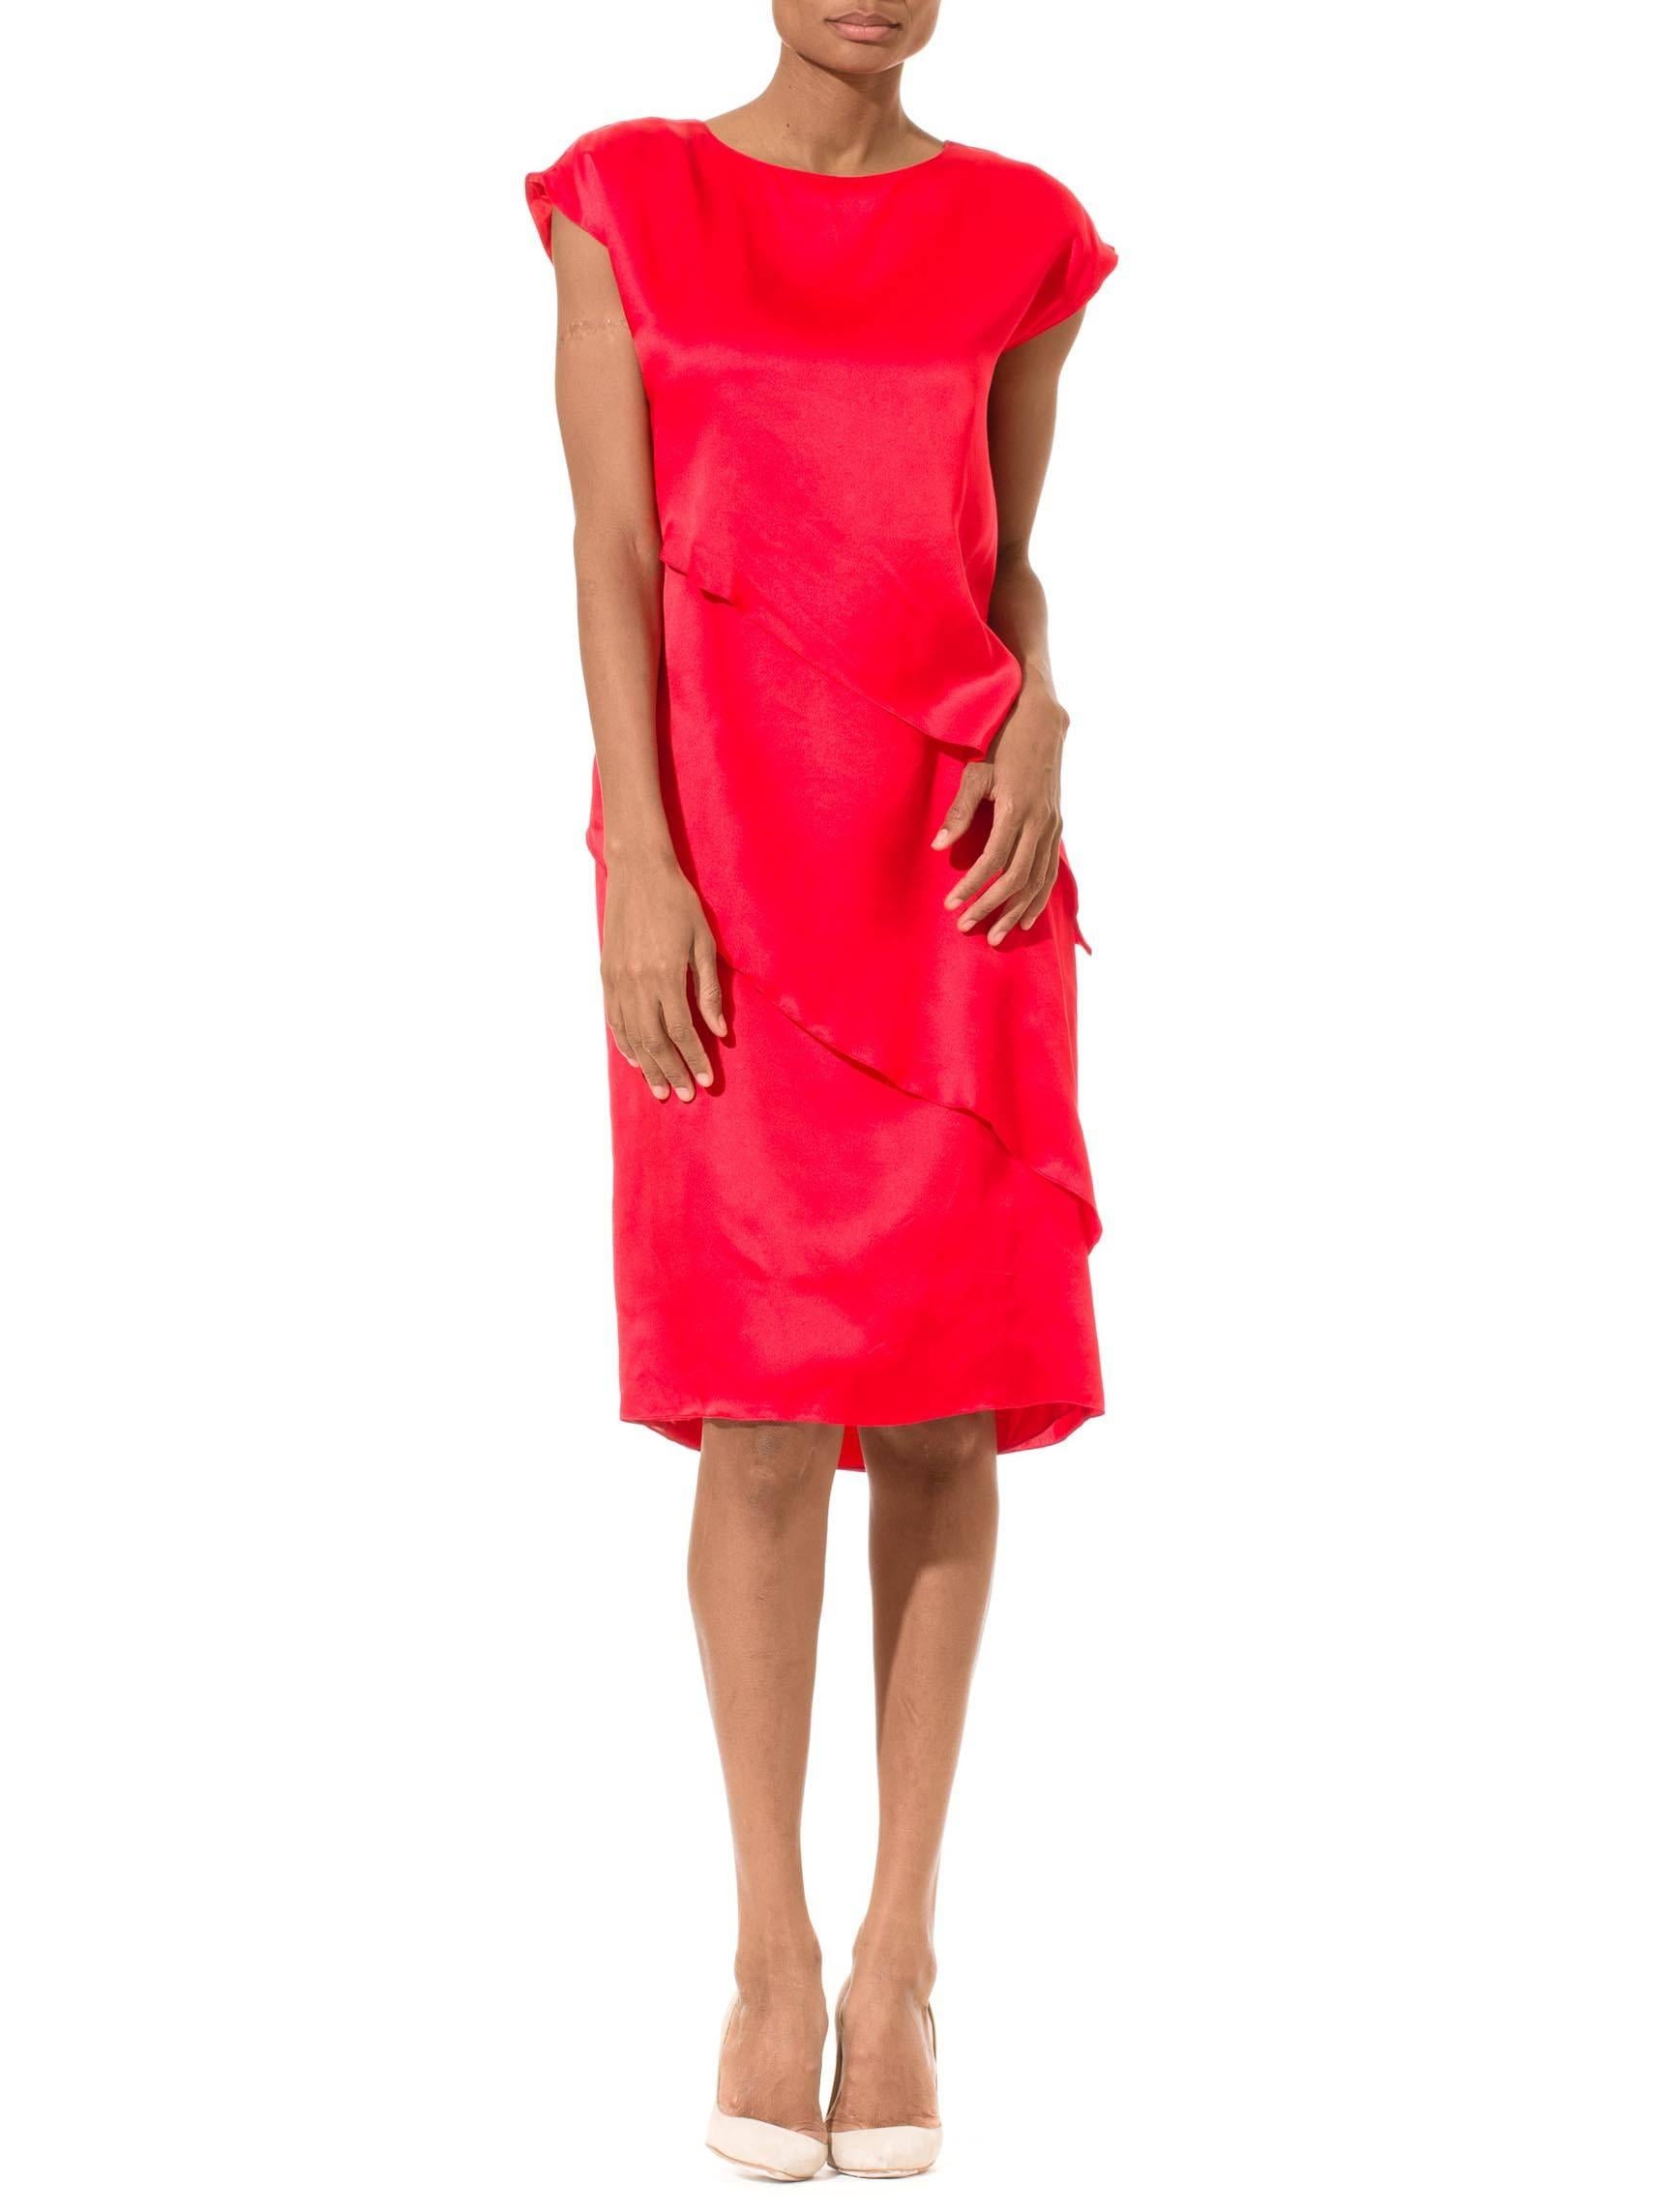 This is a gorgeous silk-satin dress by Pierre Cardin, in a bold scarlet hue. The silhouette is simple, with a straight shape falling to the knees, a demure neckline, and cap-length sleeves cut in one with the dress. The simplicity of the silhouette